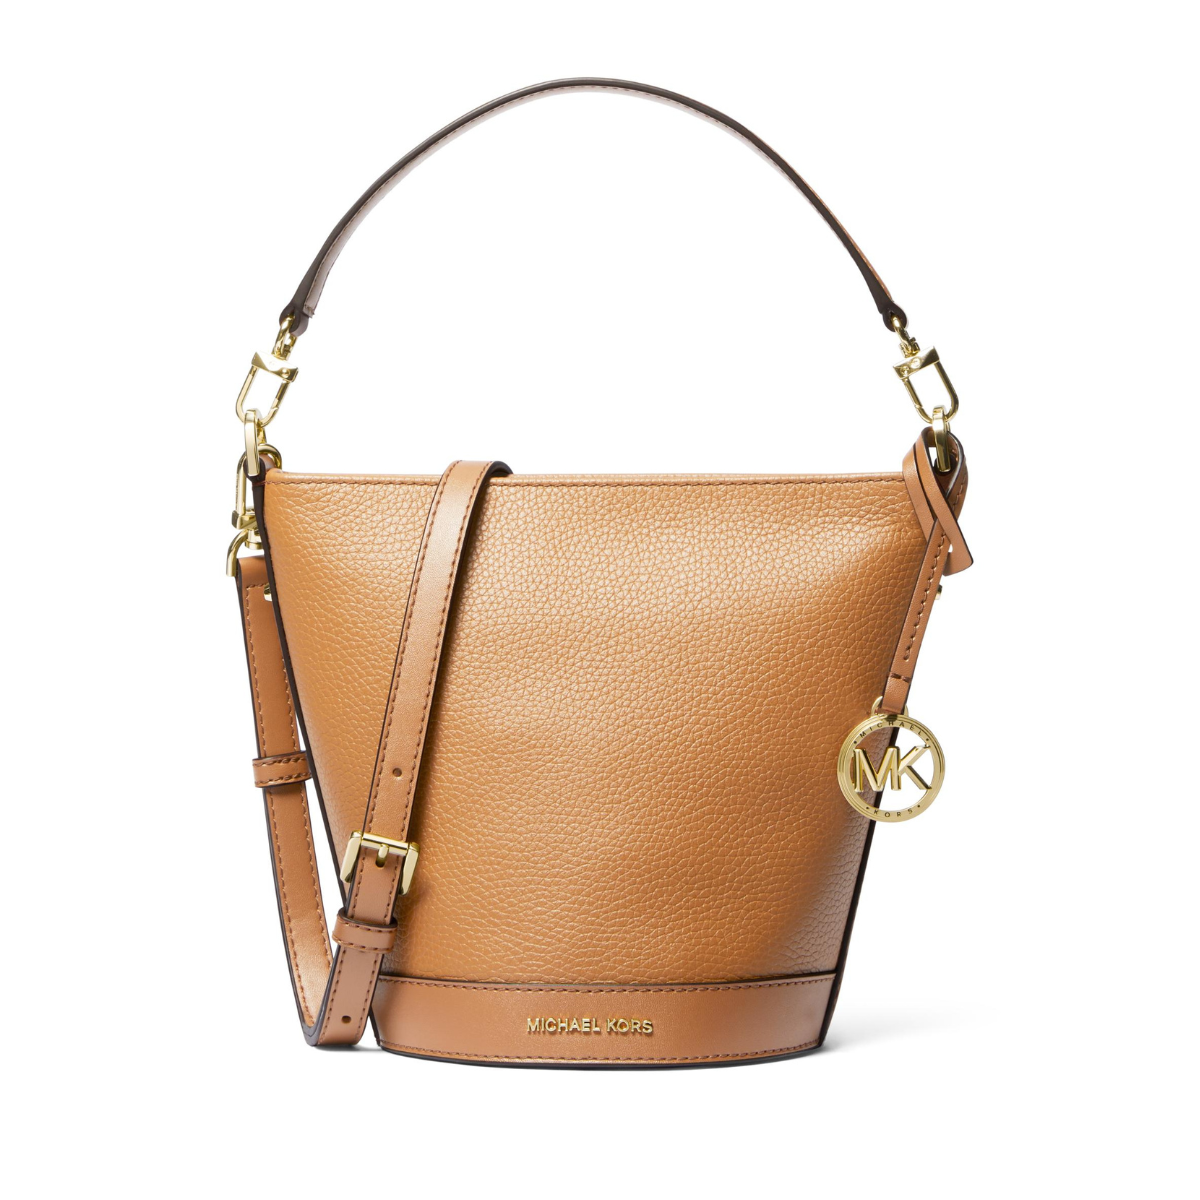 Townsend Small Leather Crossbody Bag